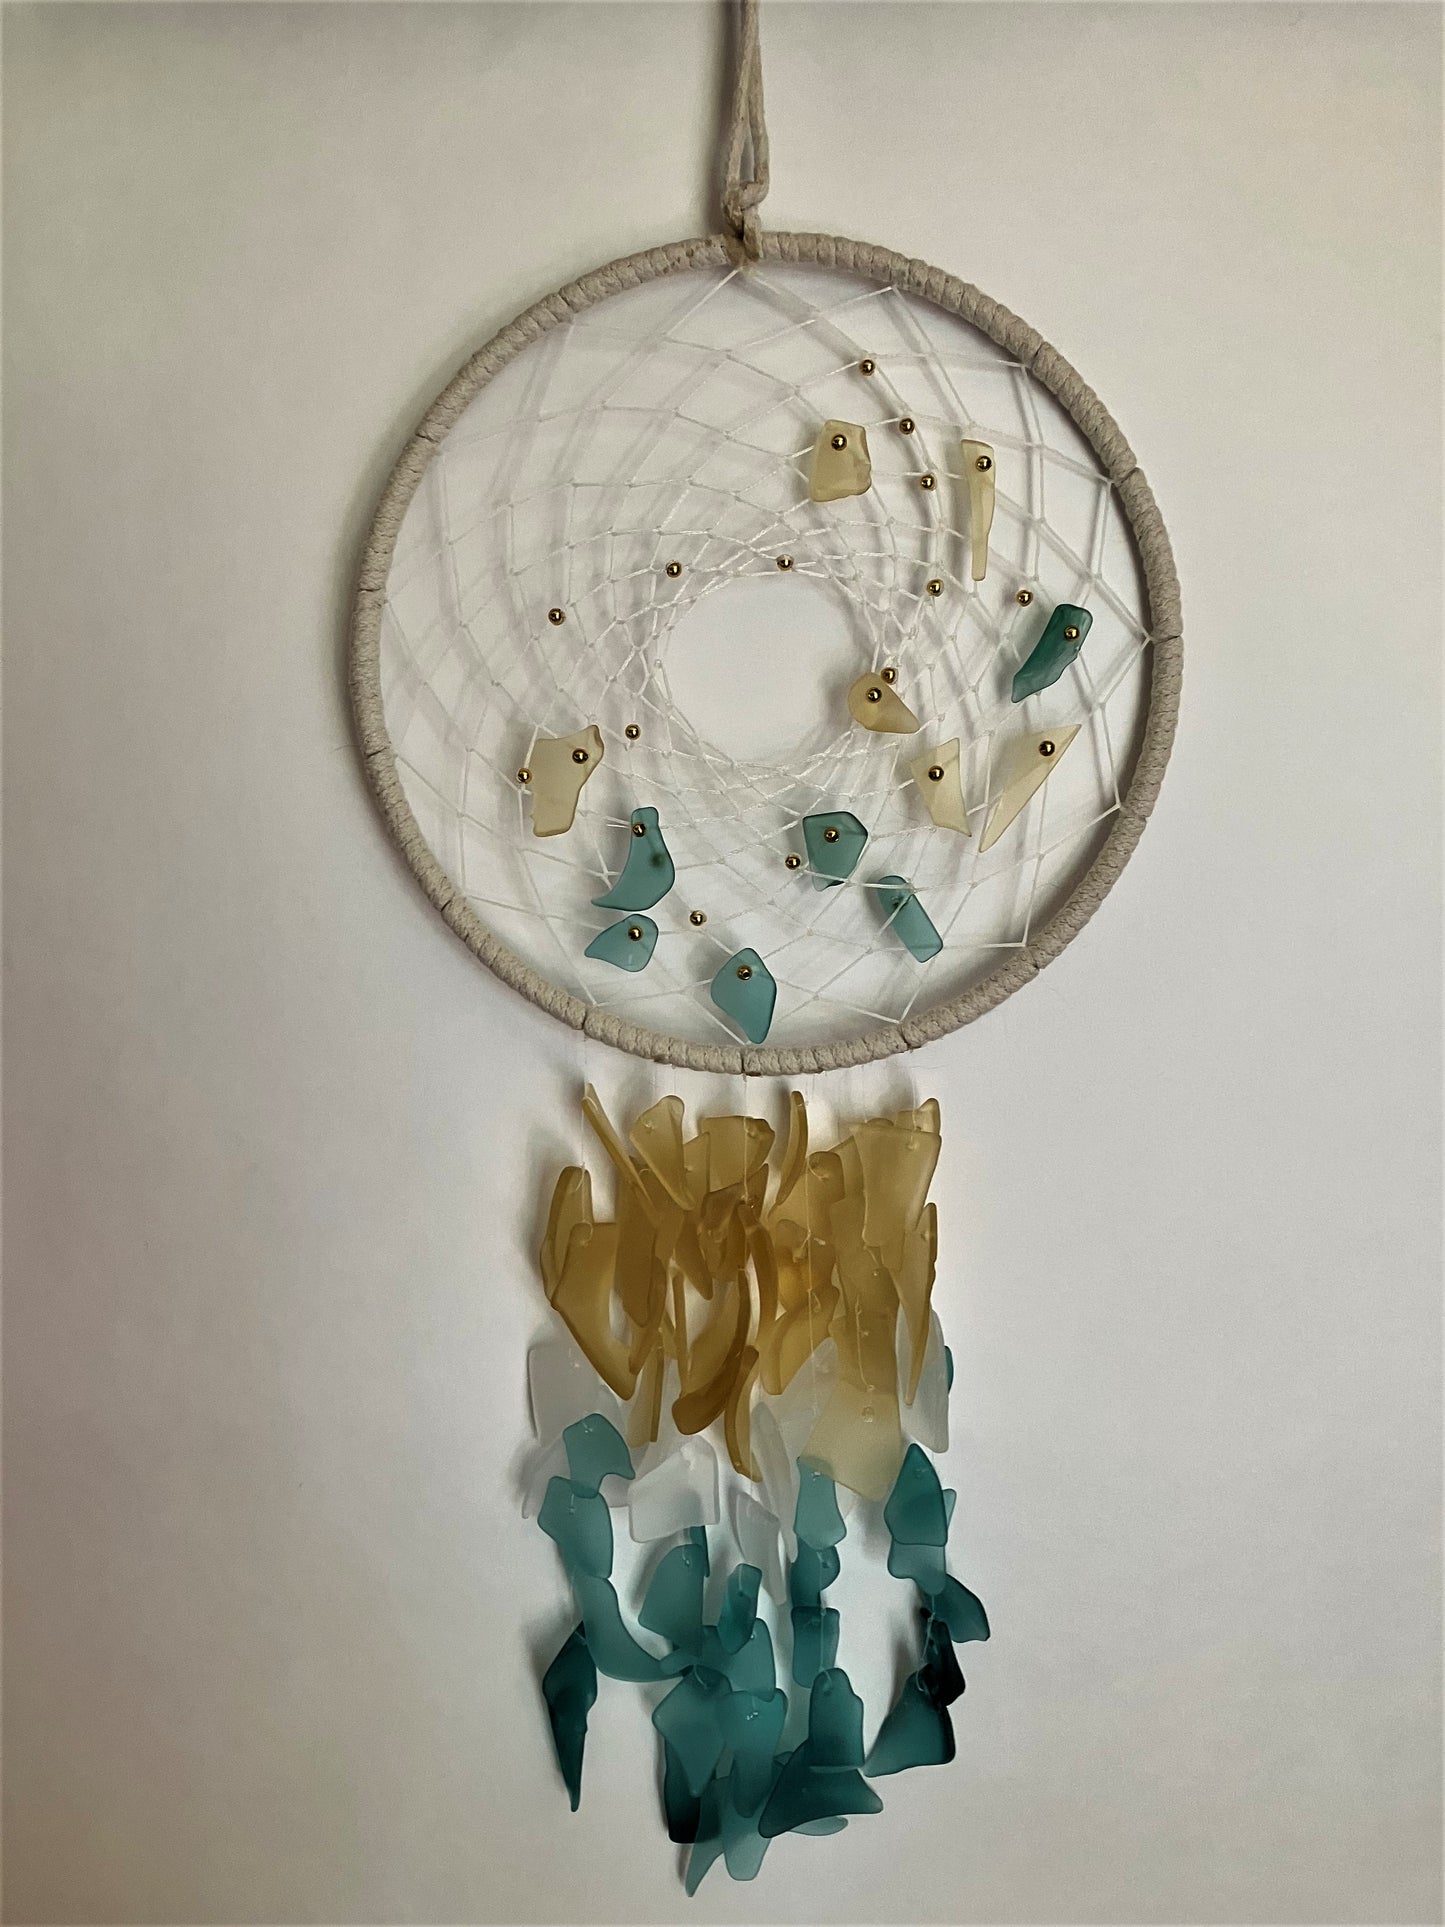 Sunrise - Large Recycled Glass Dreamcatcher 8" Ring